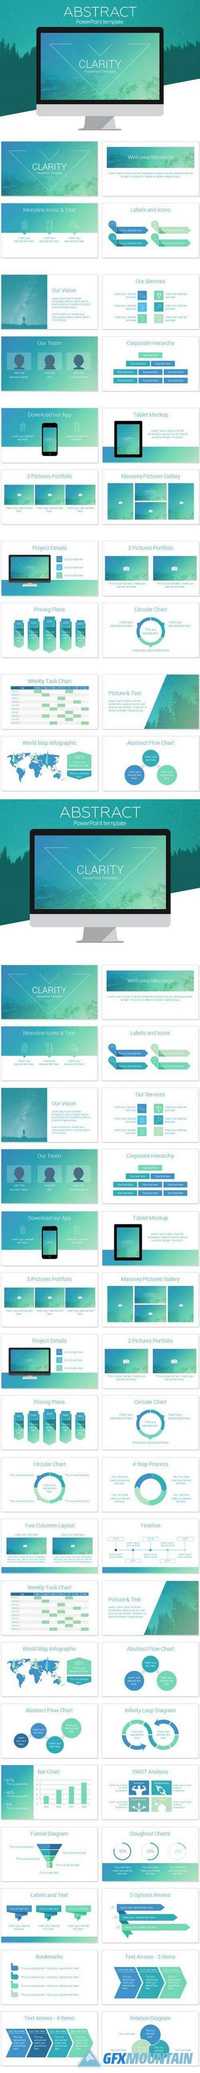 Clarity PowerPoint Template 645699